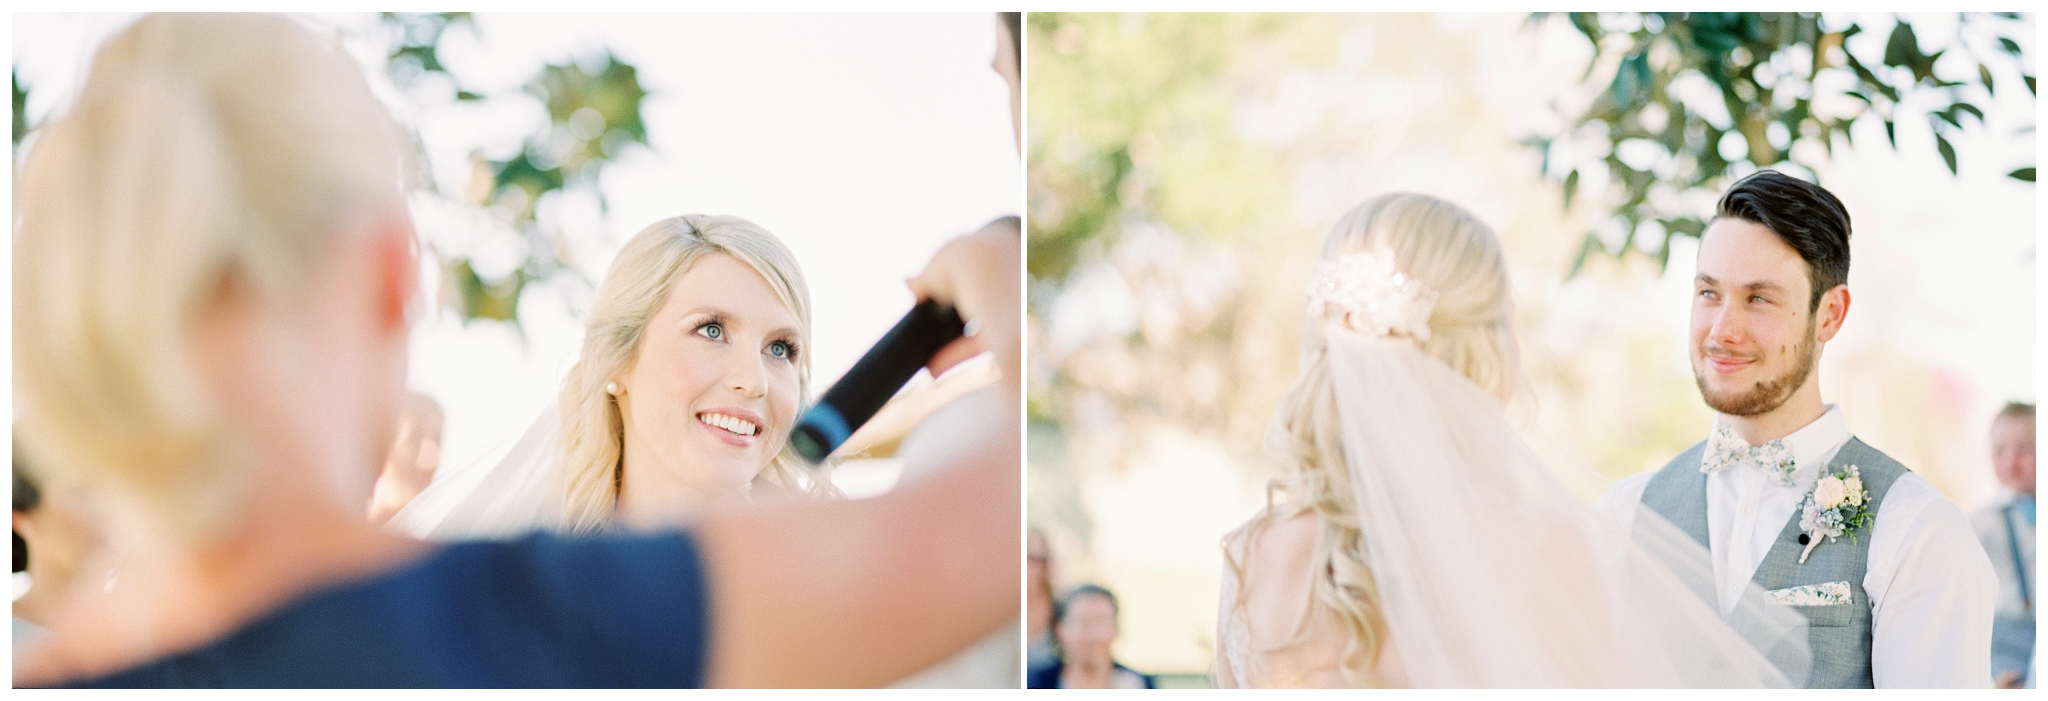 Tegan and Alex Wedding at Albert River Wines by Casey Jane Photography 38